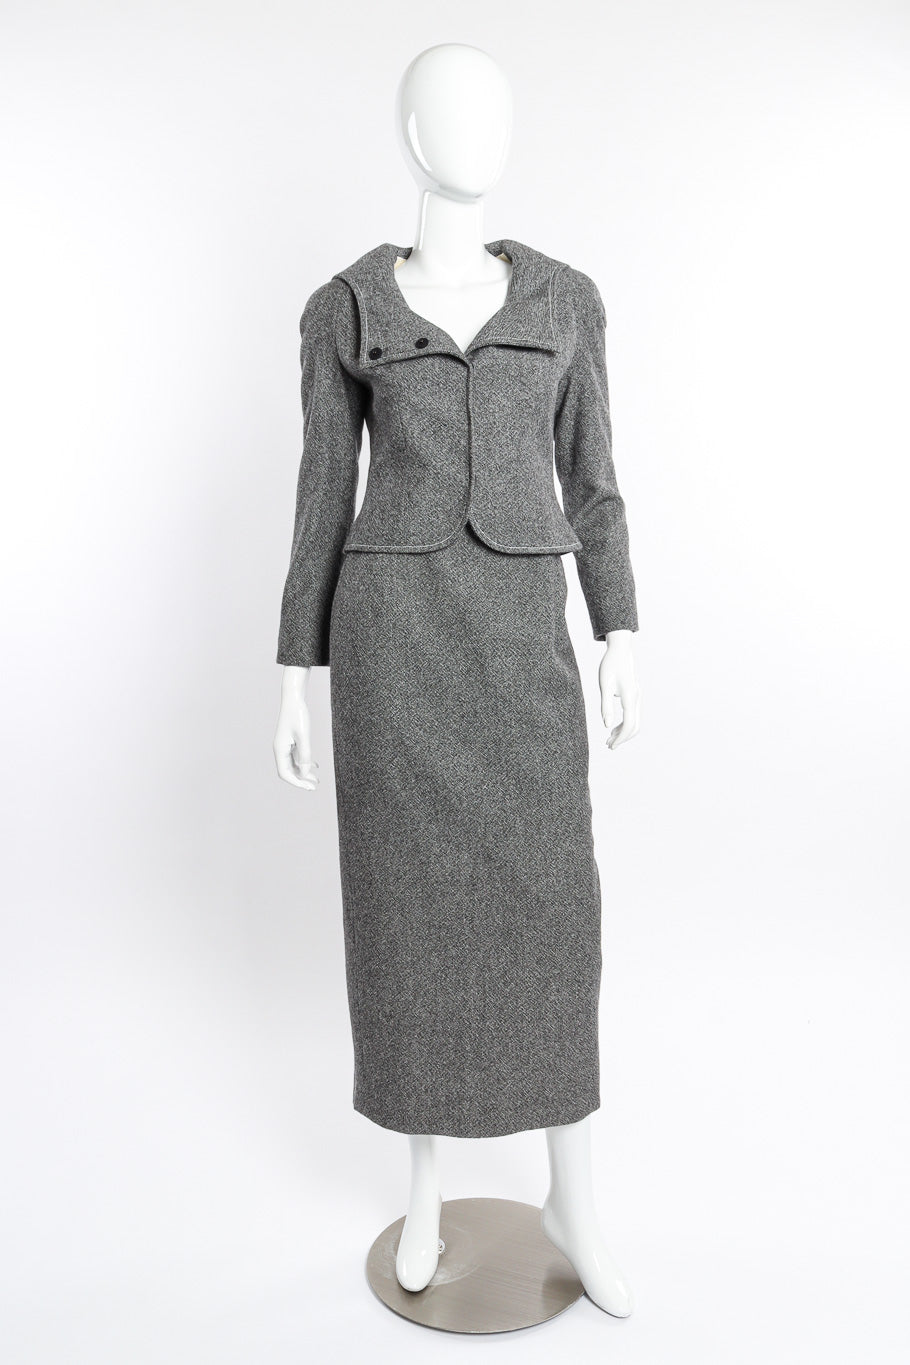 Wool Jacket & Wrap Skirt Suit by Christian Dior on mannequin @recessla